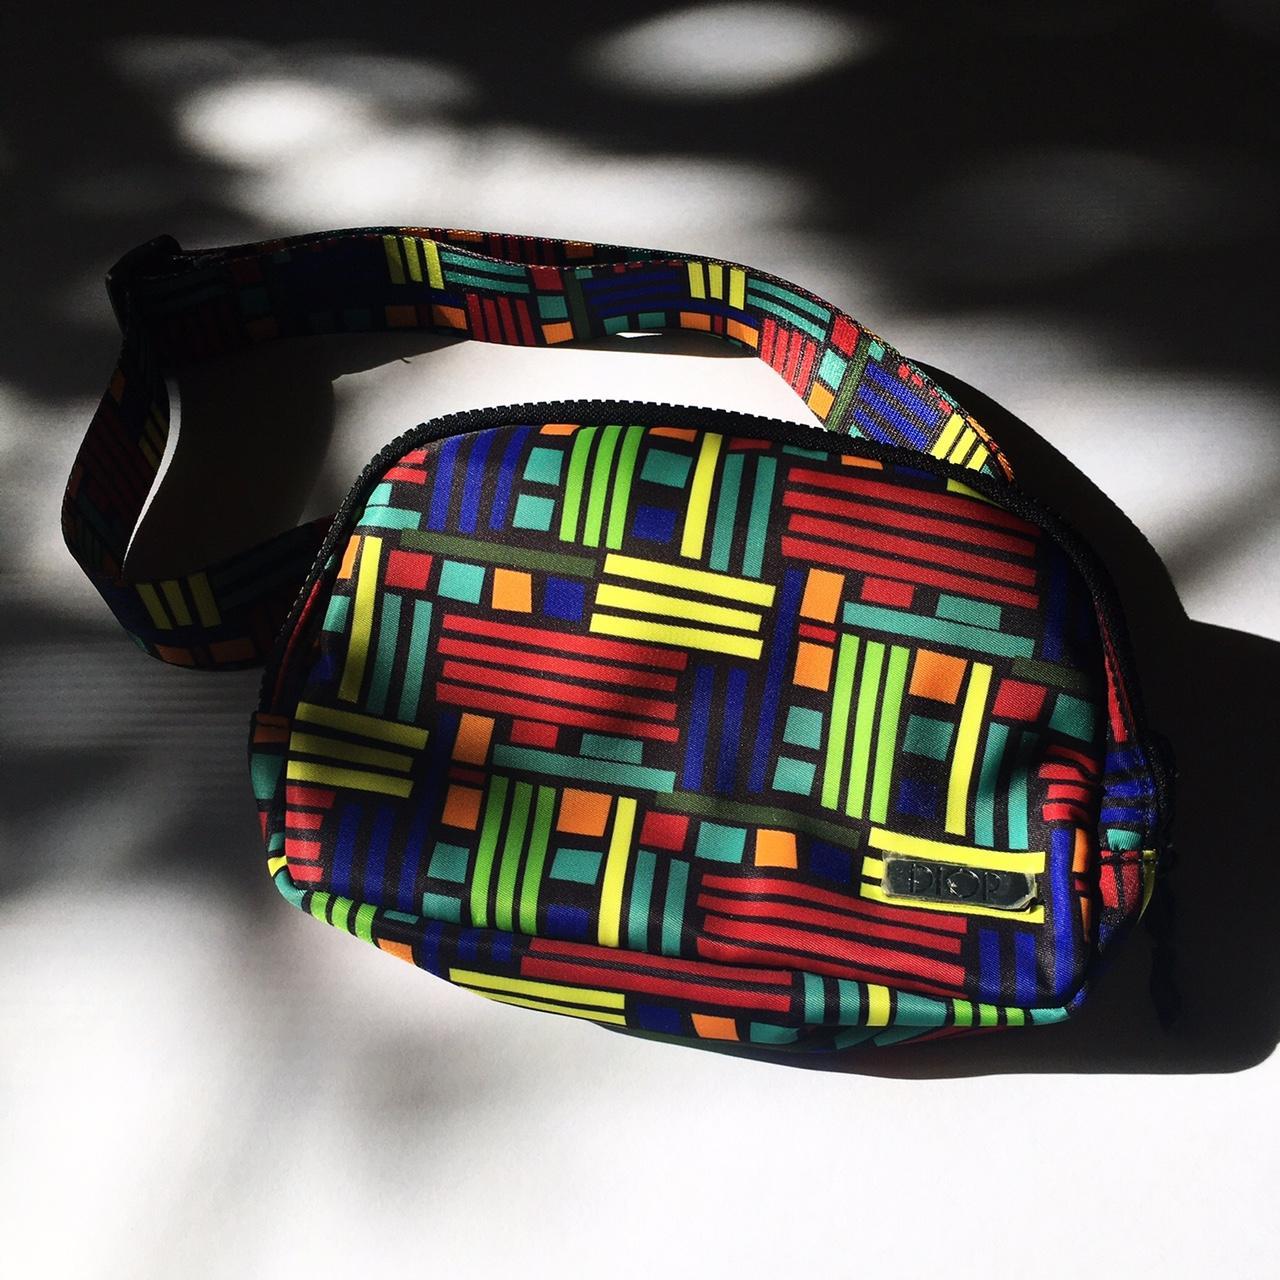 Product Image 2 - Diop the Weka Fanny Pack

Super